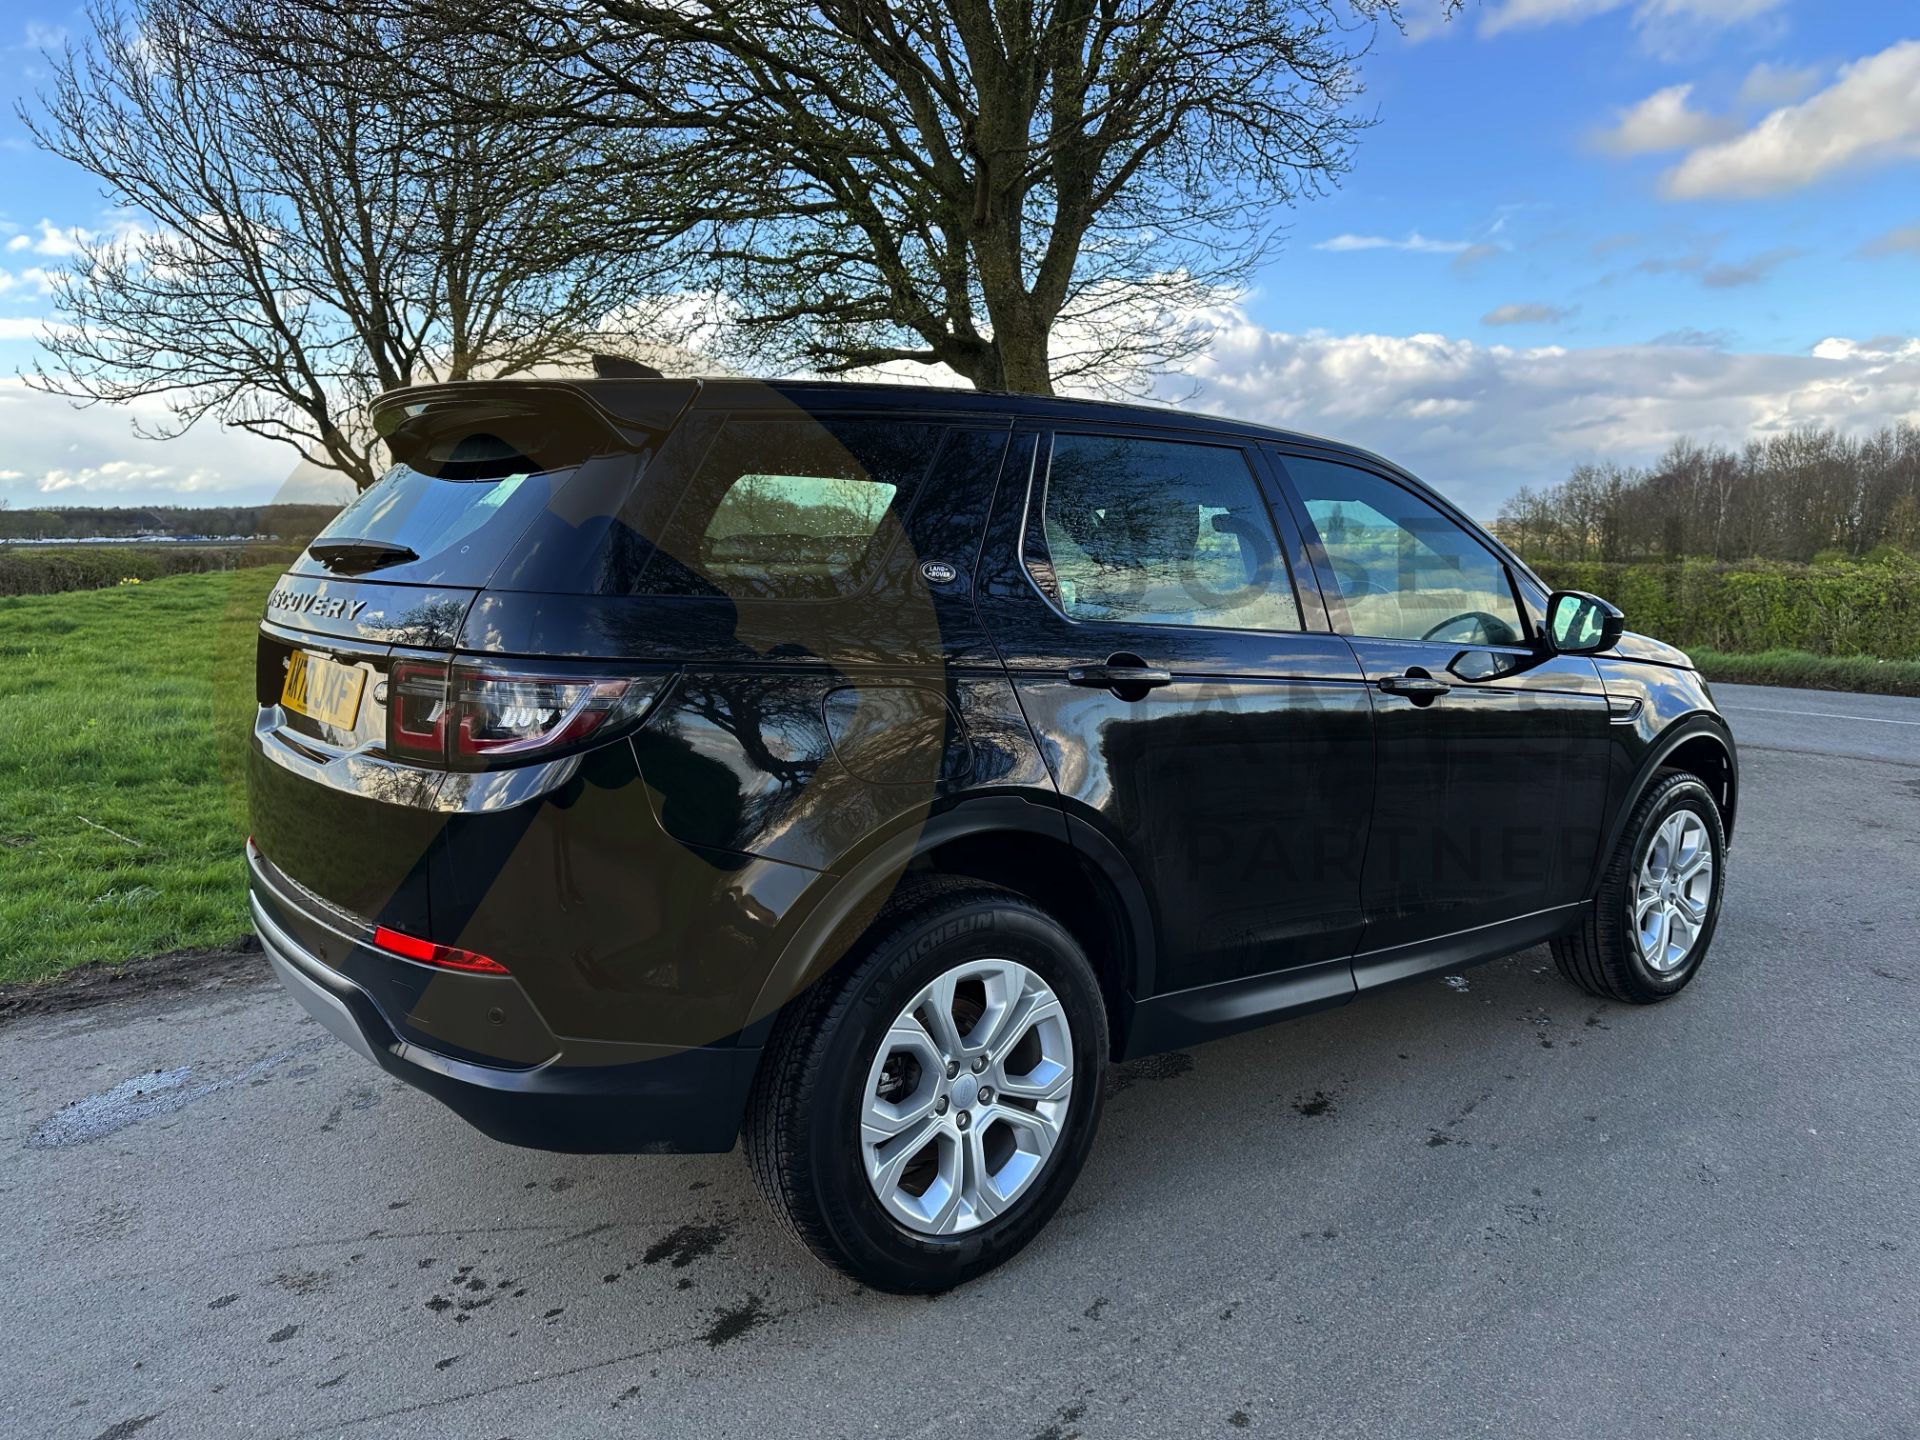 (ON SALE) LAND ROVER DISCOVERY SPORT (2021 - ALL NEW FACELIFT MODEL) 2.0 DIESEL - AUTO STOP/START - Image 12 of 50